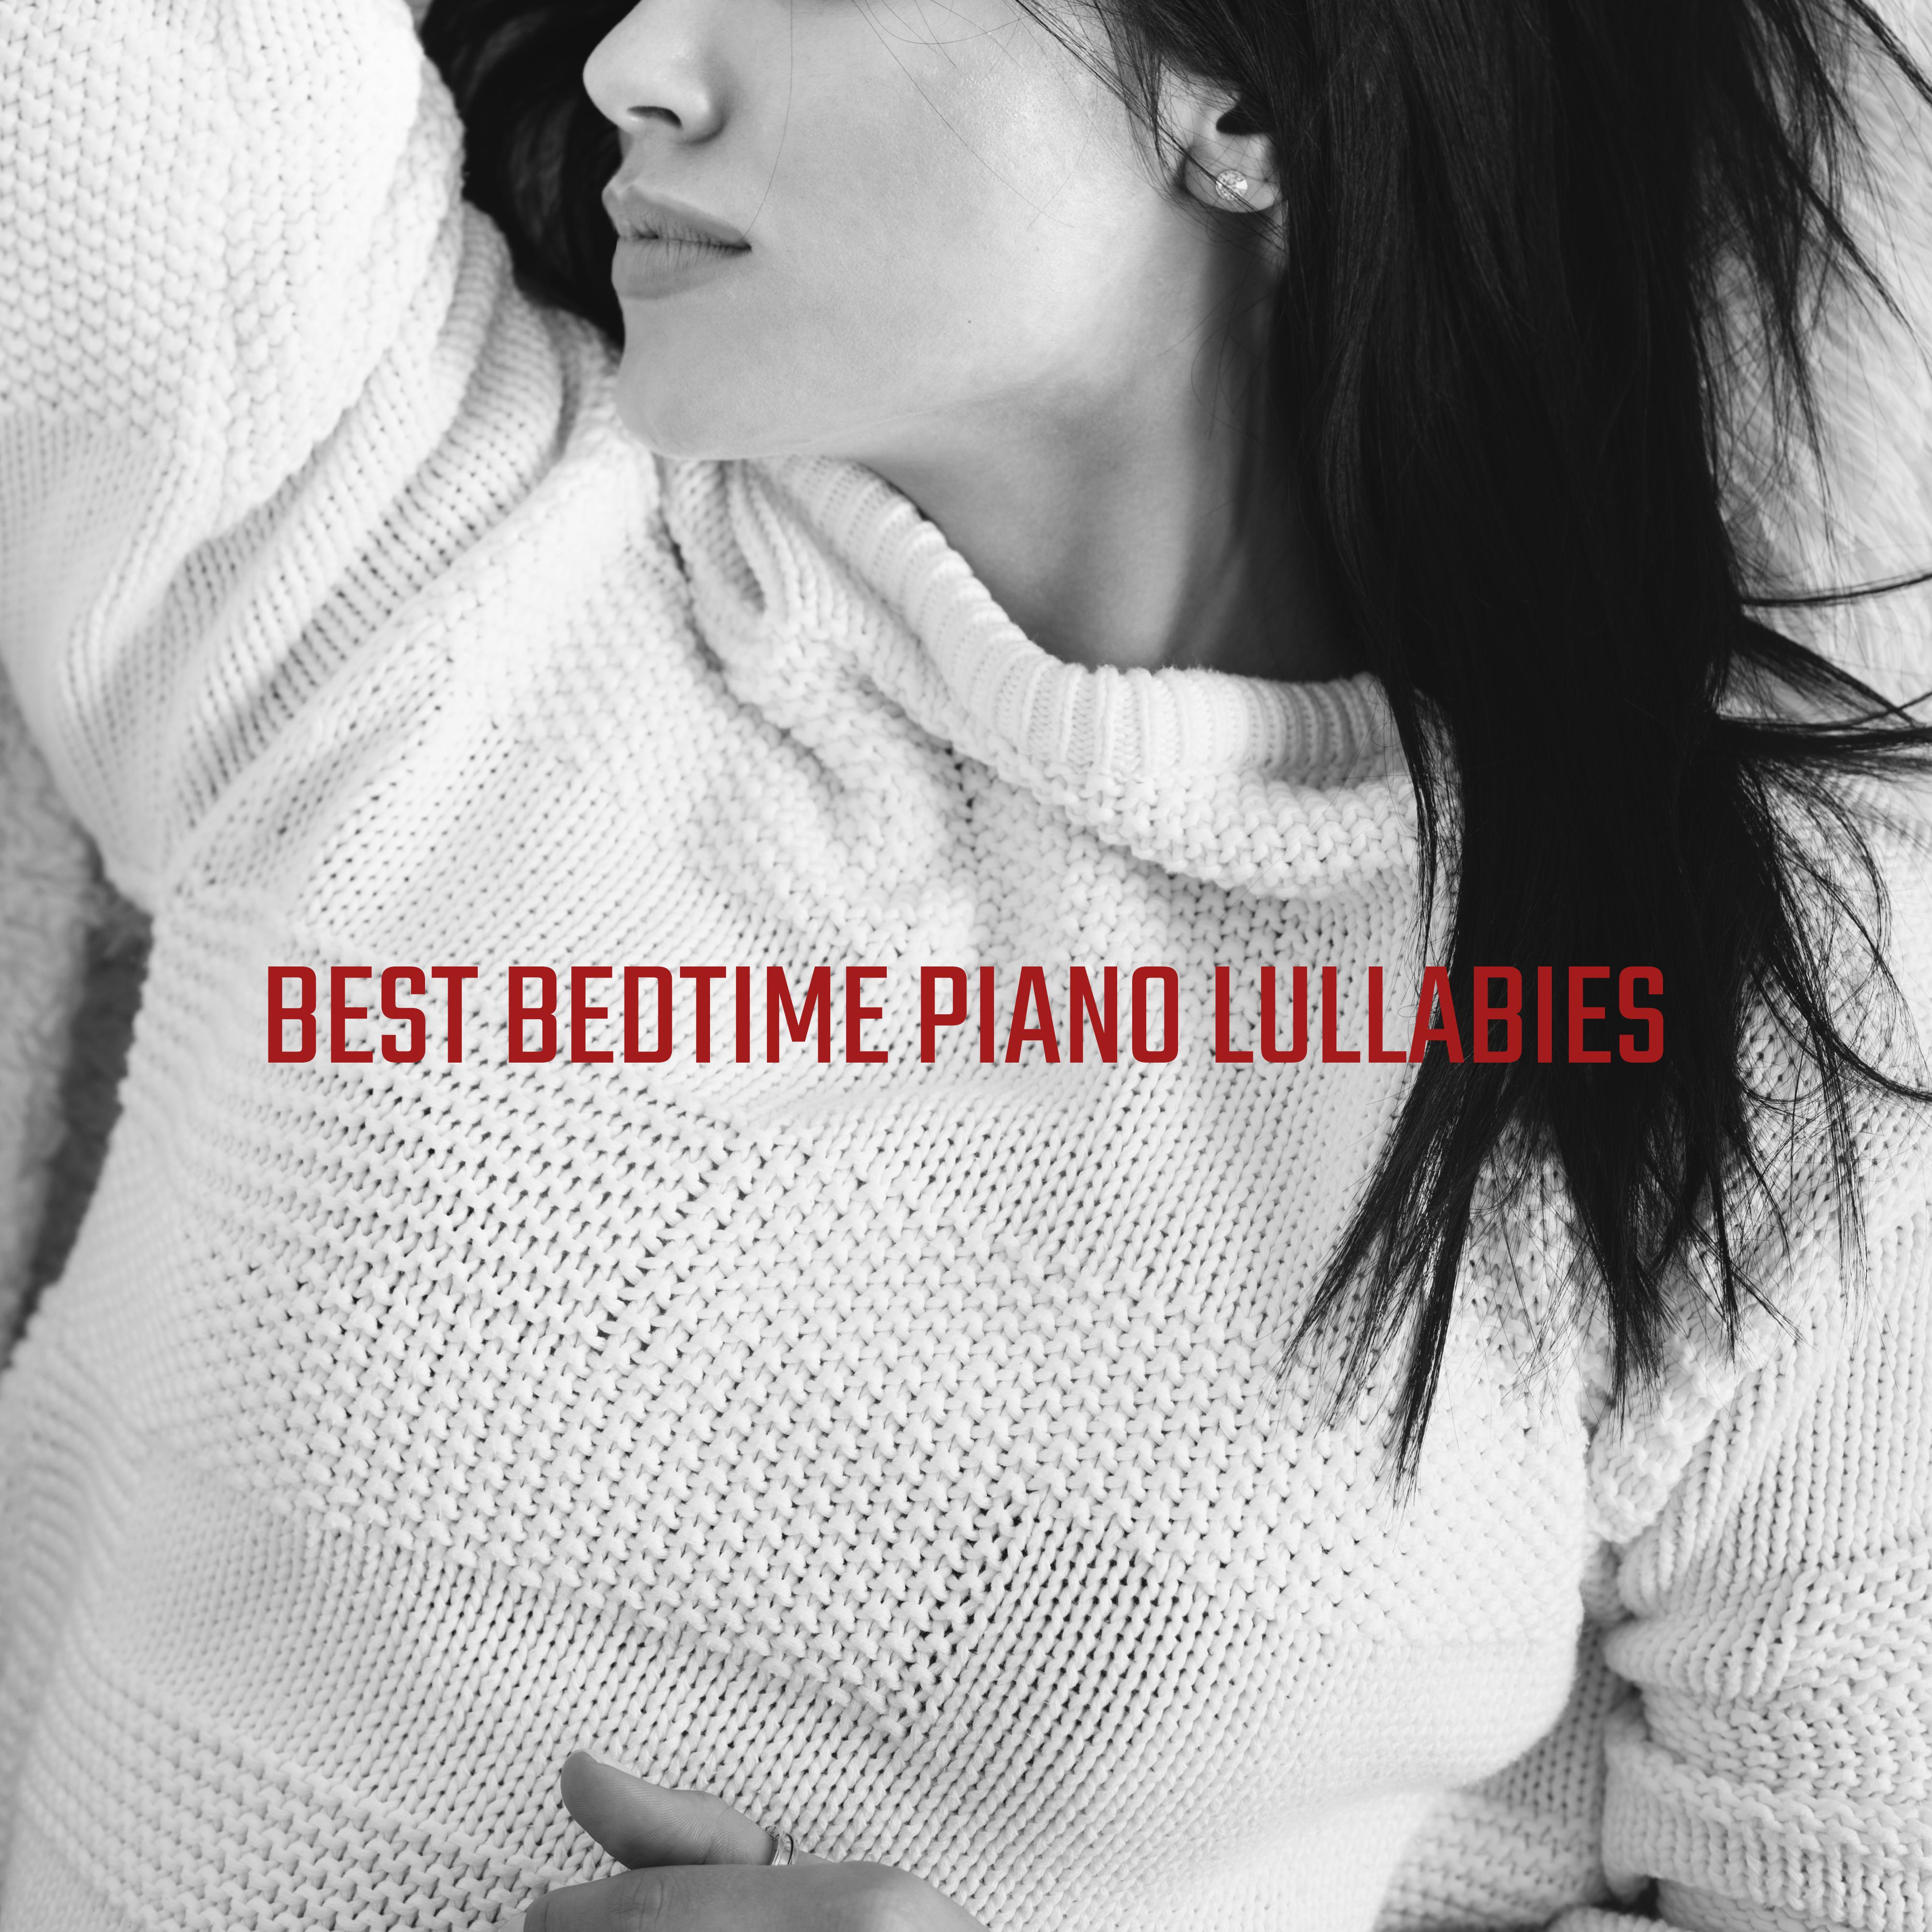 Best Bedtime Piano Lullabies: Smooth Piano Melodies for Perfect Sleep, Calming Down, Stress Relief, Relax After Tough Day